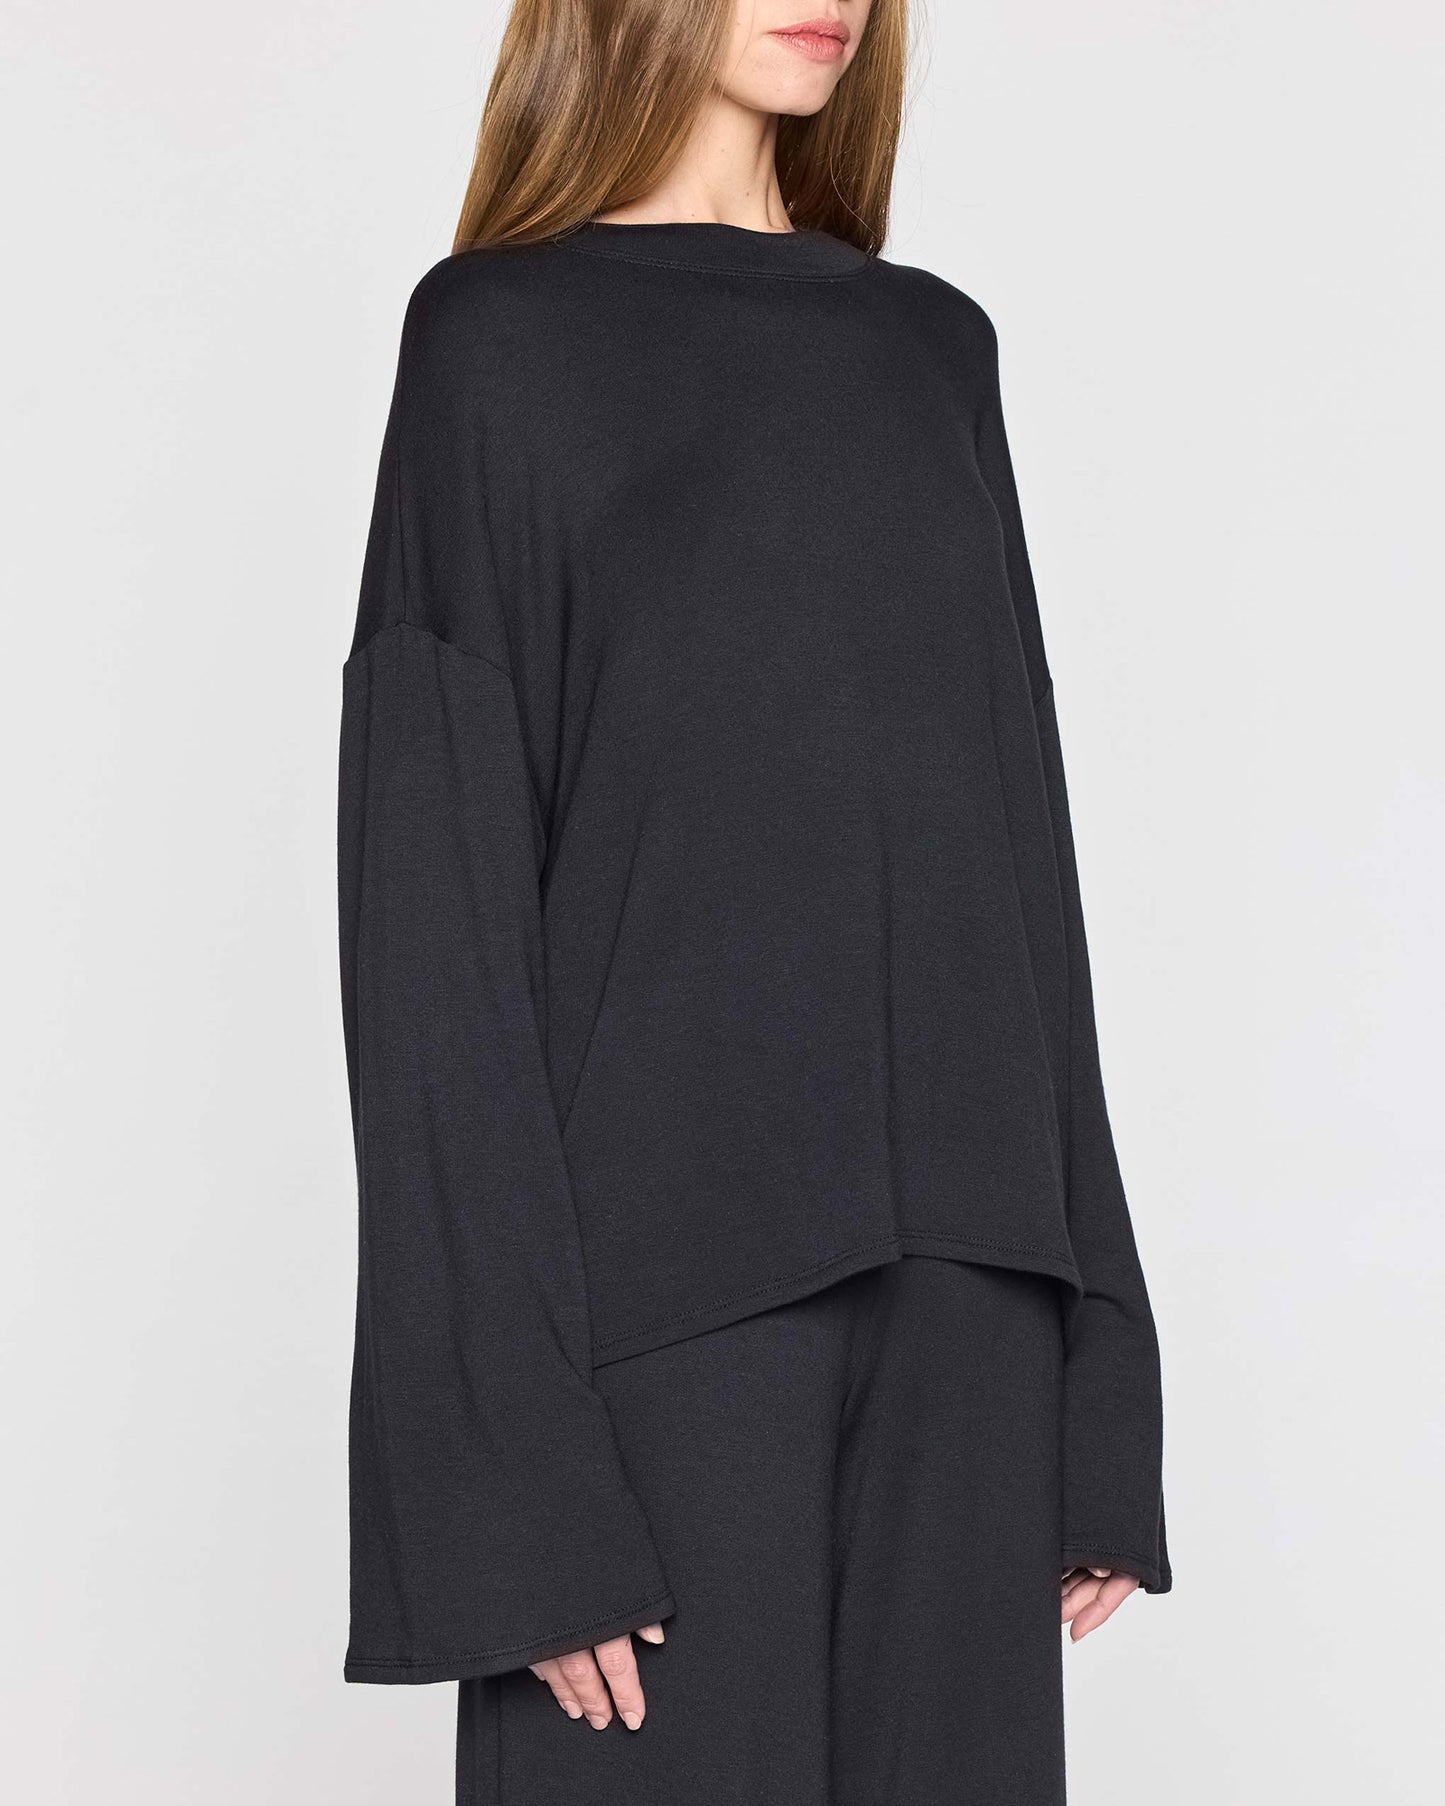 Black | The Bell Sleeve Crew Angle